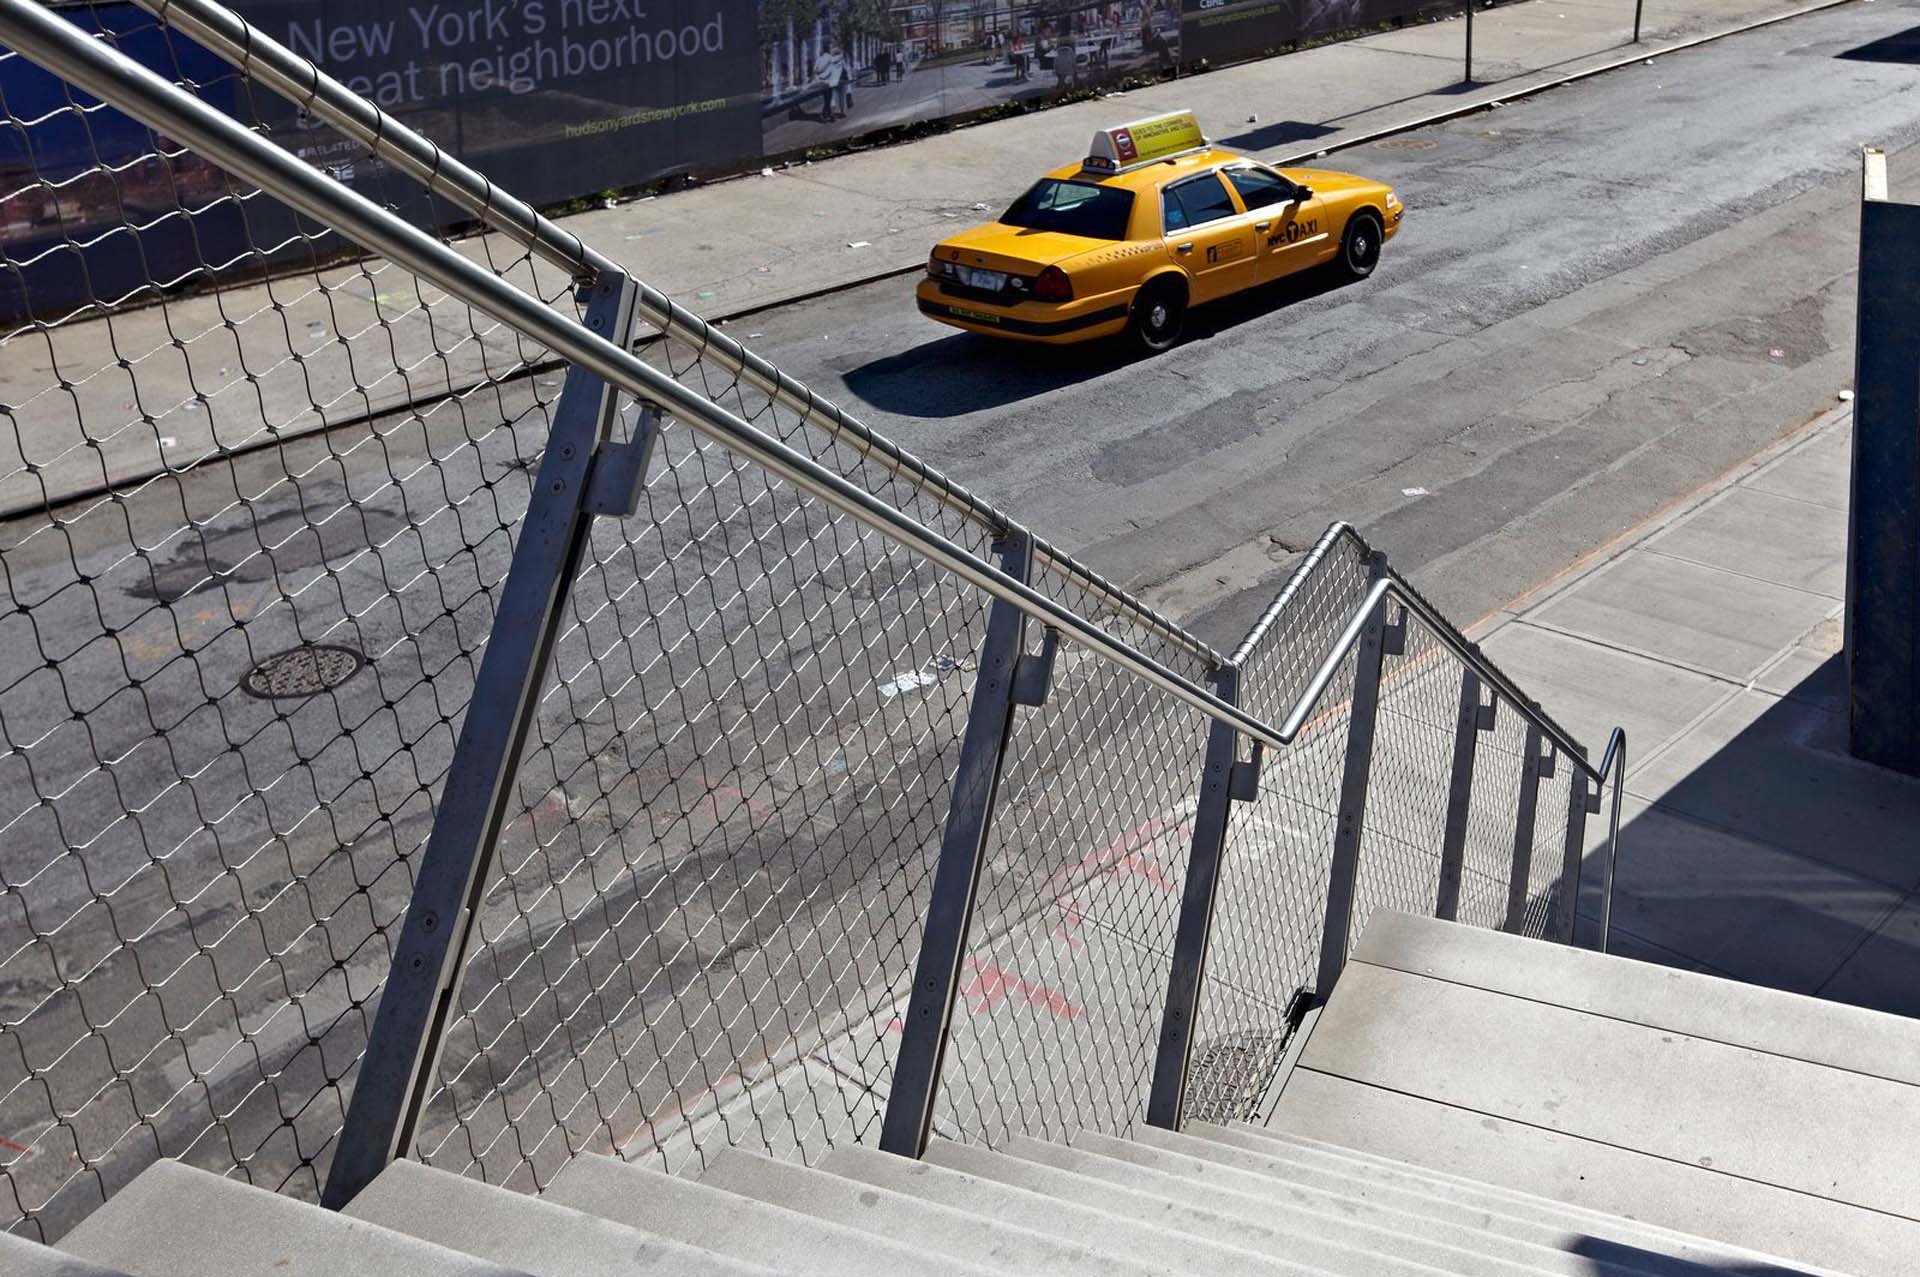 A yellow New York cab in front of a stair with a Webnet railing